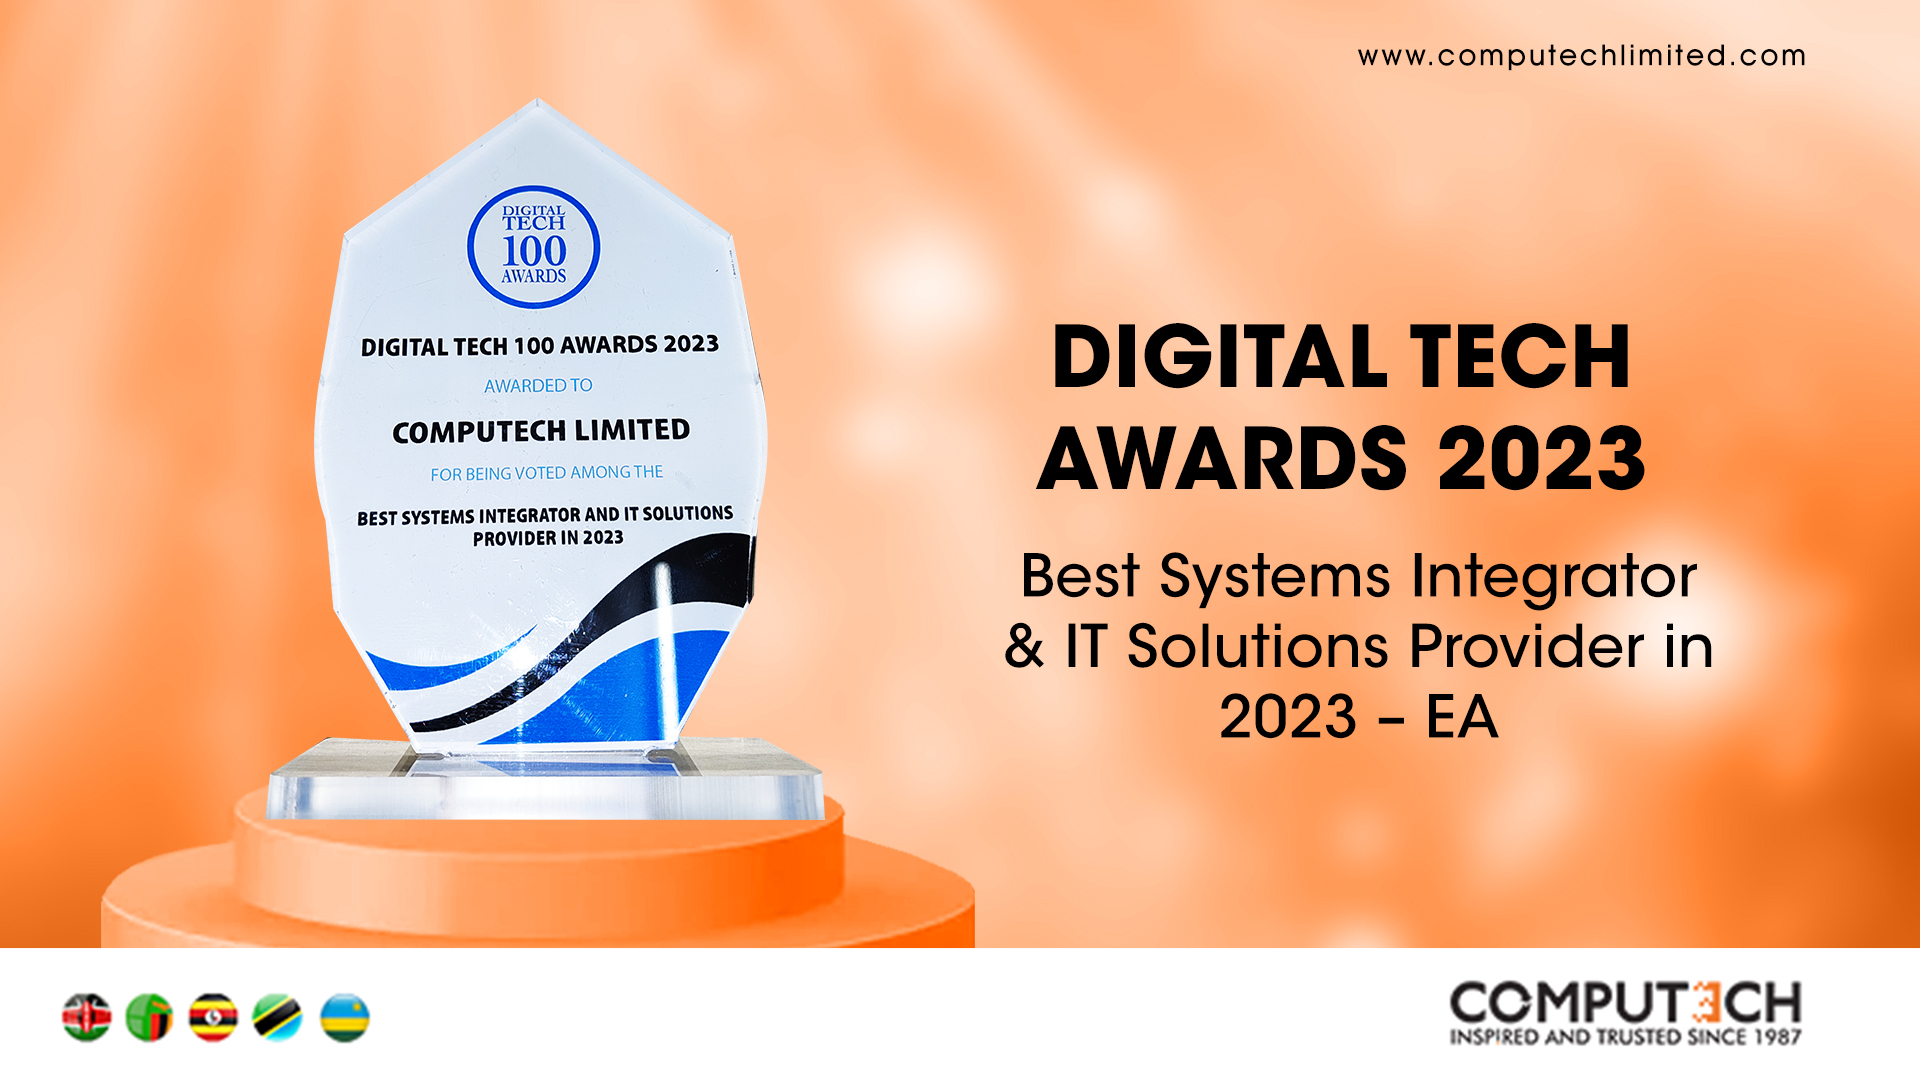 Computech Reigns Supreme: Best System's Integrator & IT Solutions Provider of 2023.